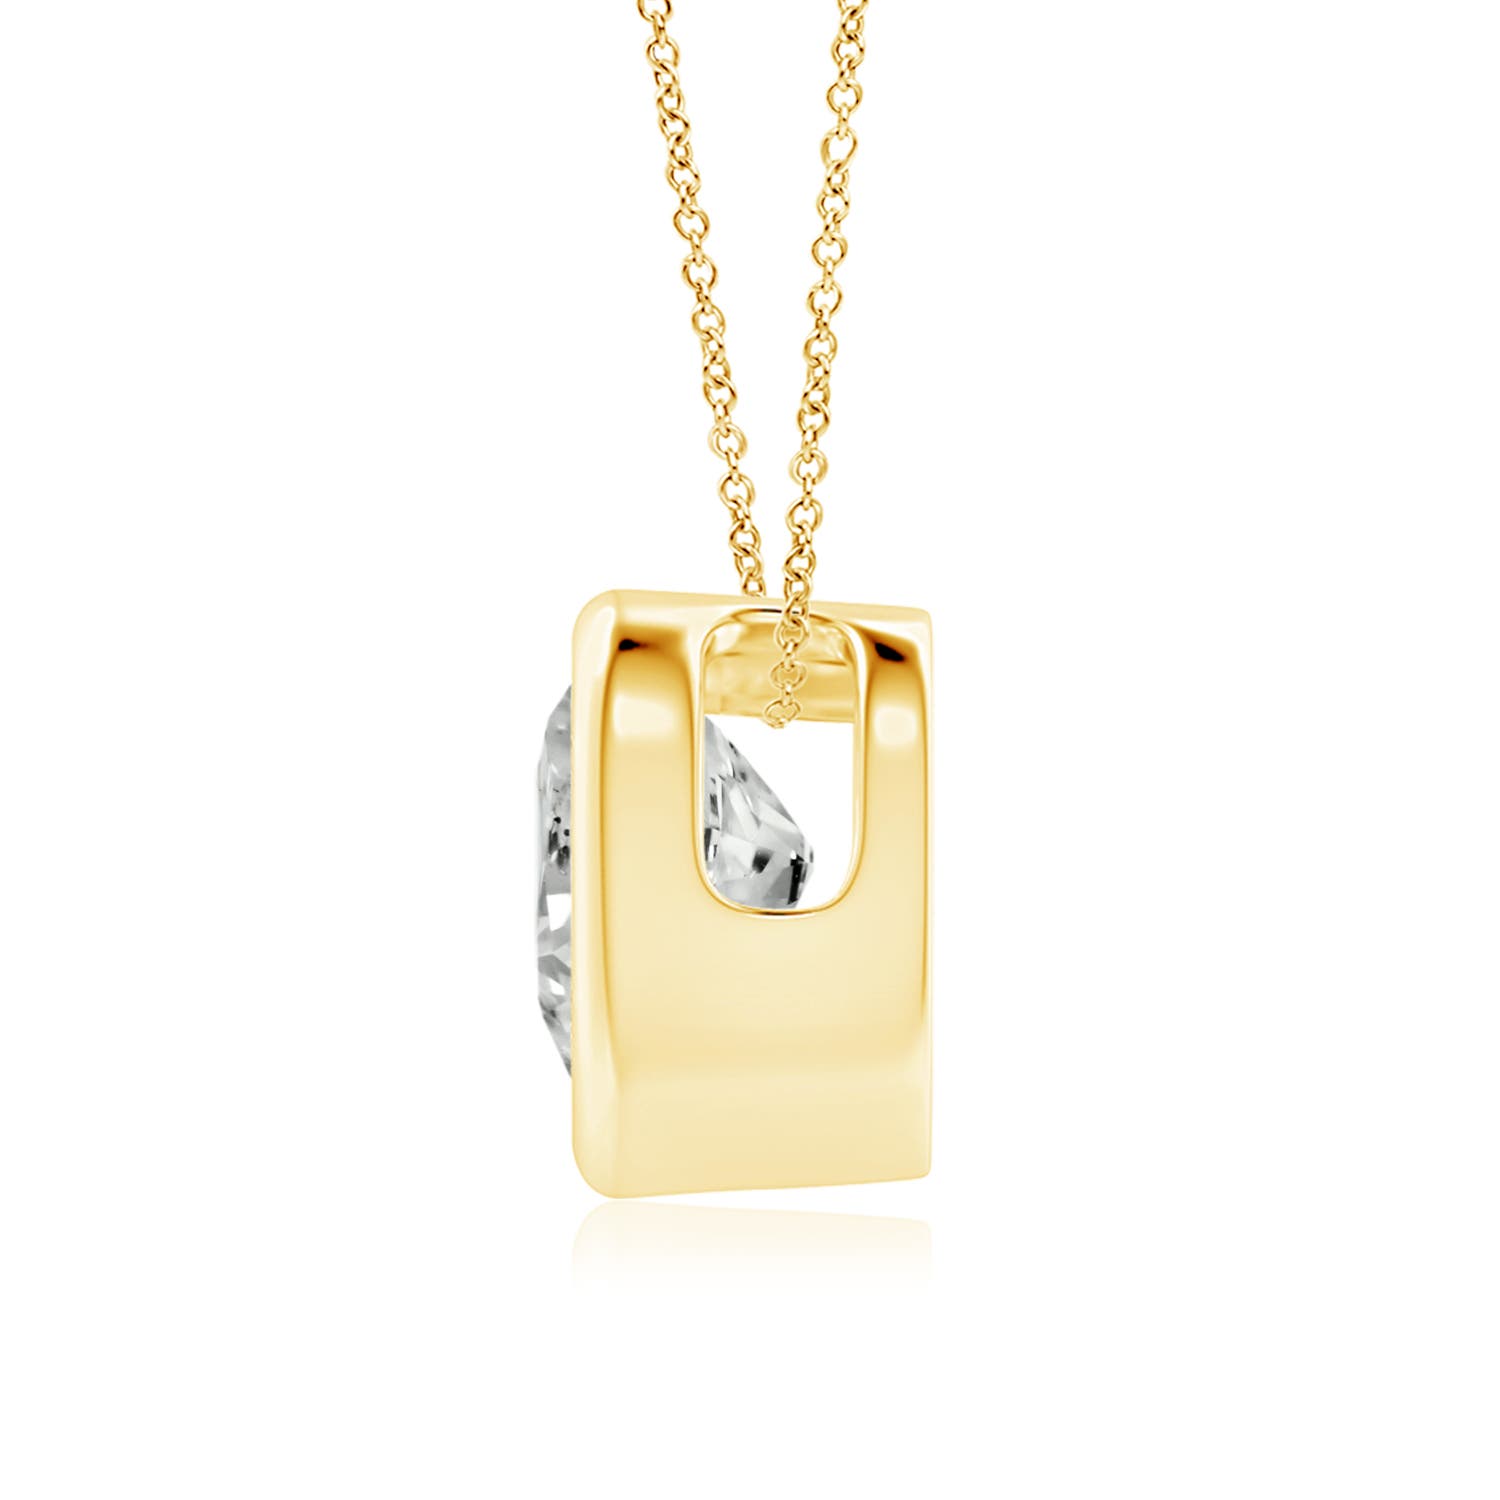 K, I3 / 0.75 CT / 14 KT Yellow Gold